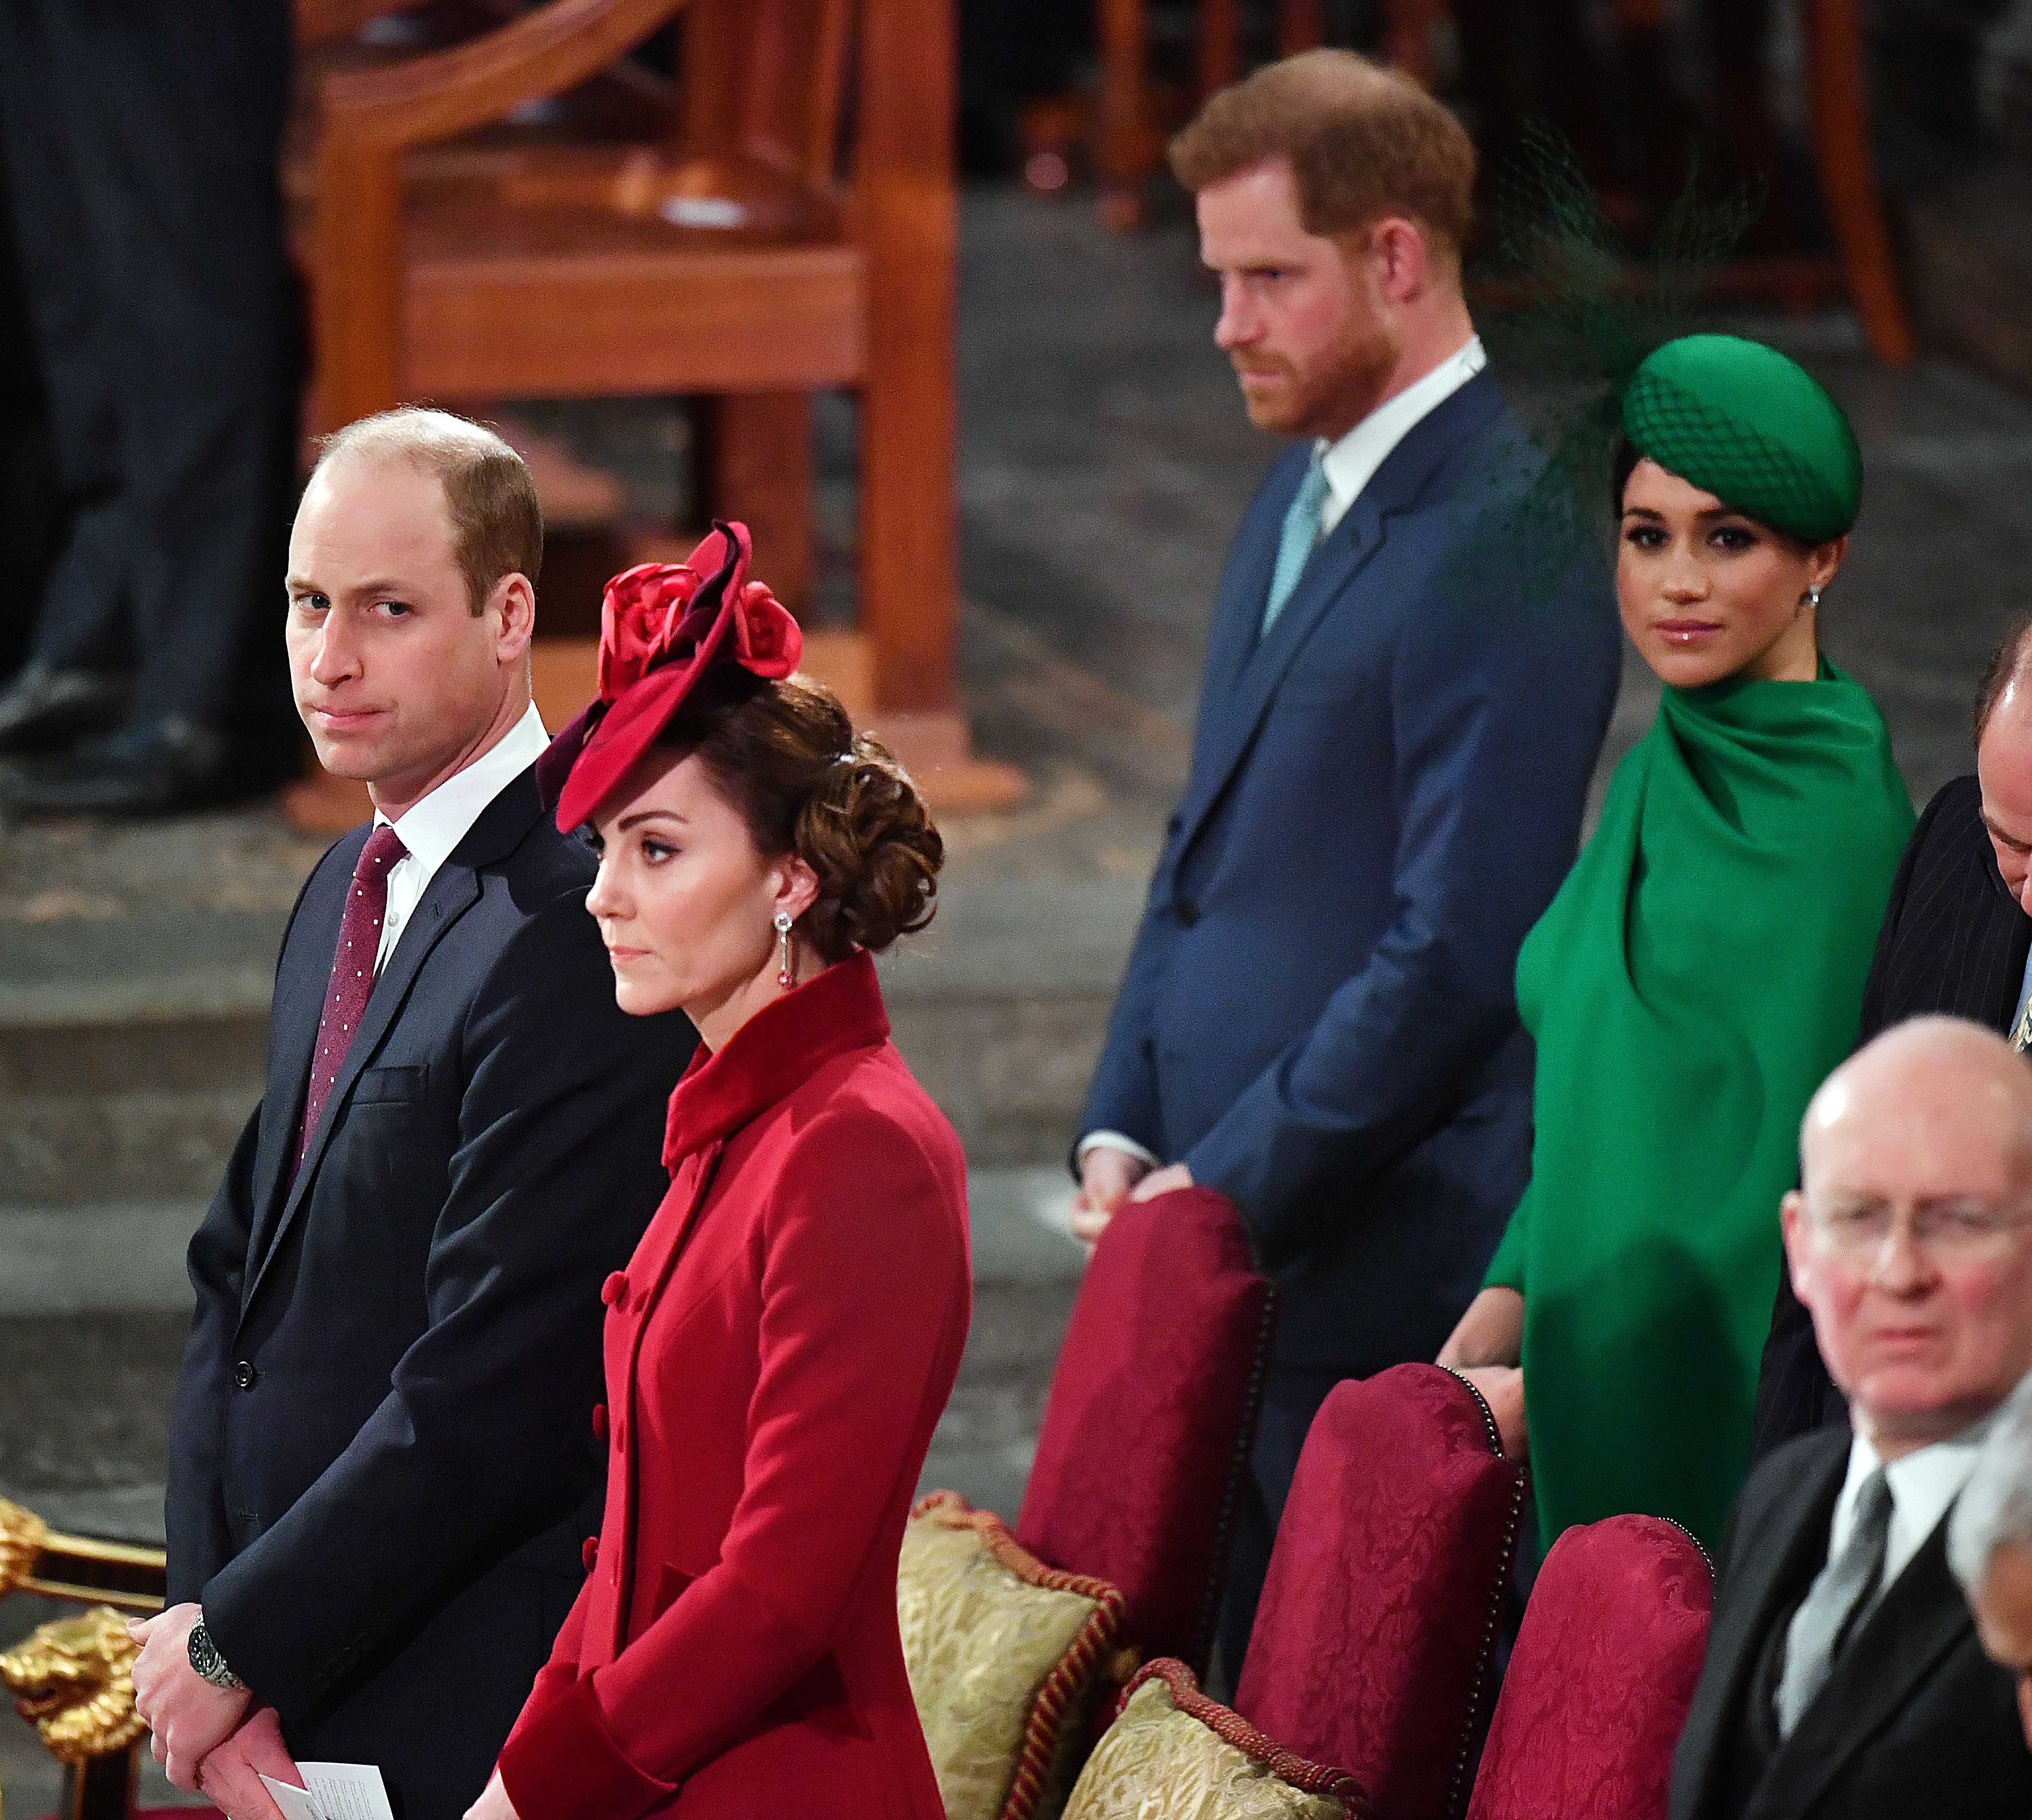 Prince William, Duchess Kate, Prince Harry, and Duchess Meghan at the Commonwealth Day Service on March 9, 2020, in London, England | Photo: Phil Harris - WPA Pool/Getty Images